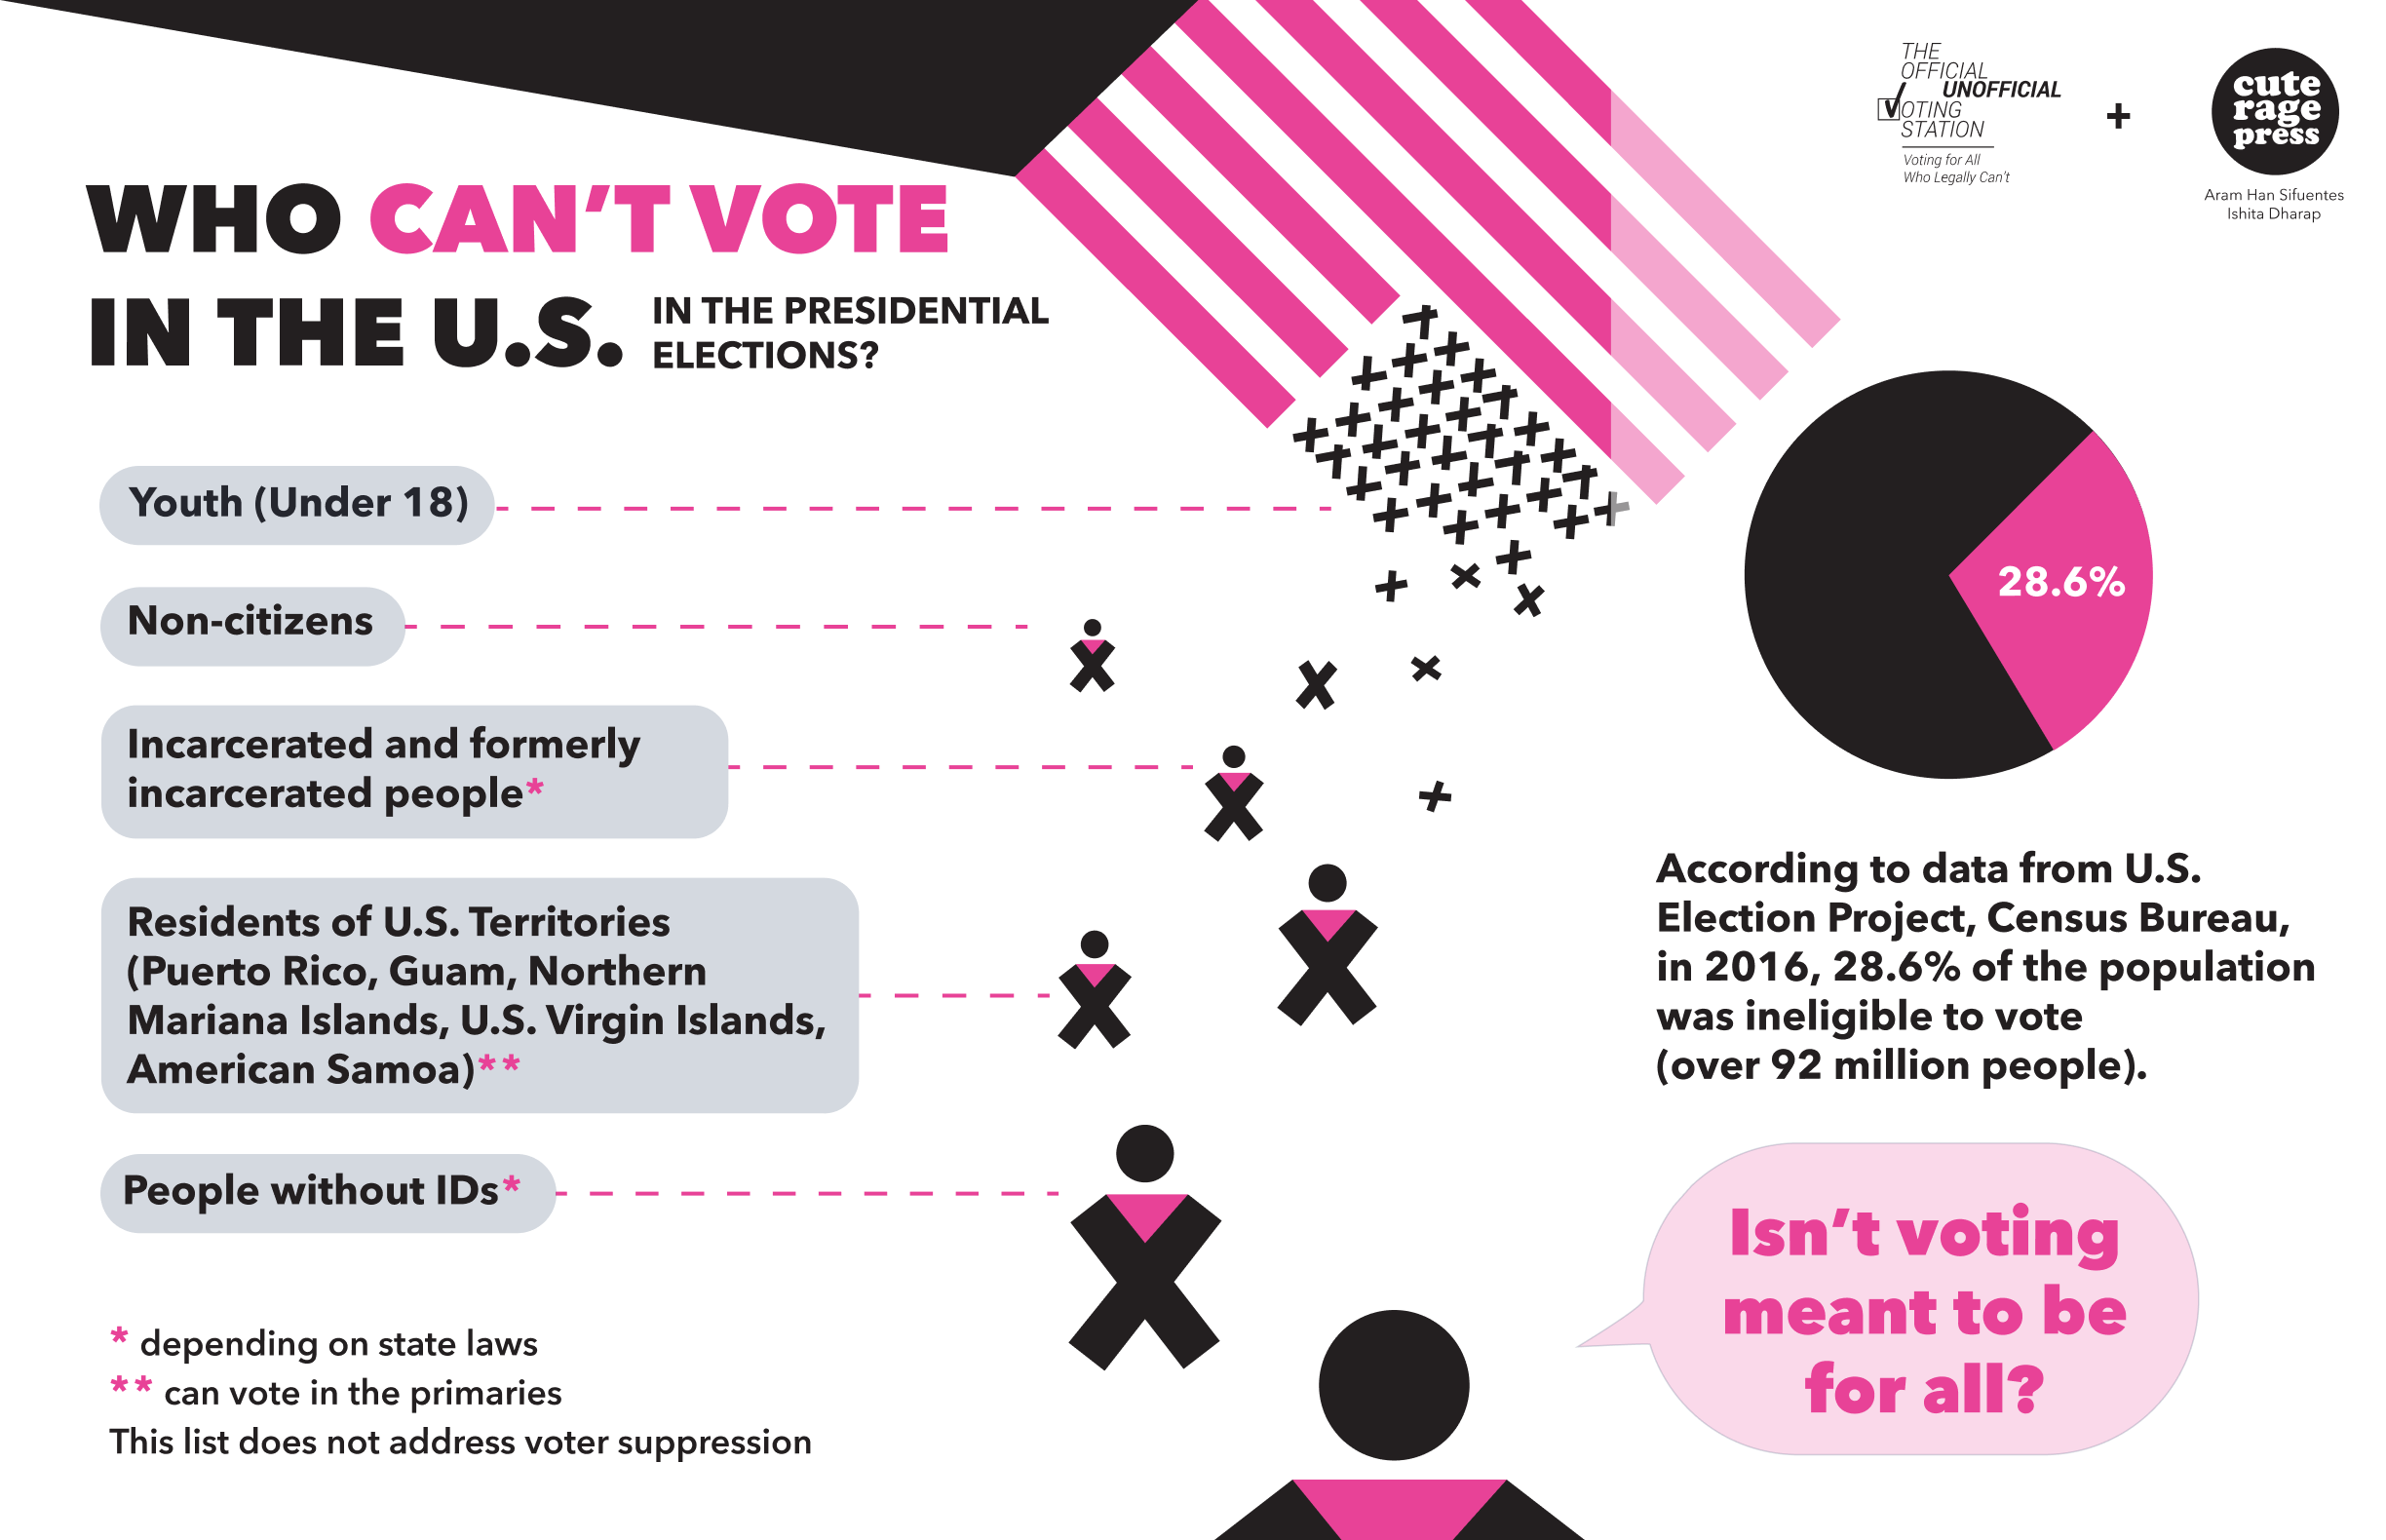 Who can't vote in the US election data poster by Aram Han Sifuentes and Cute Rage Press